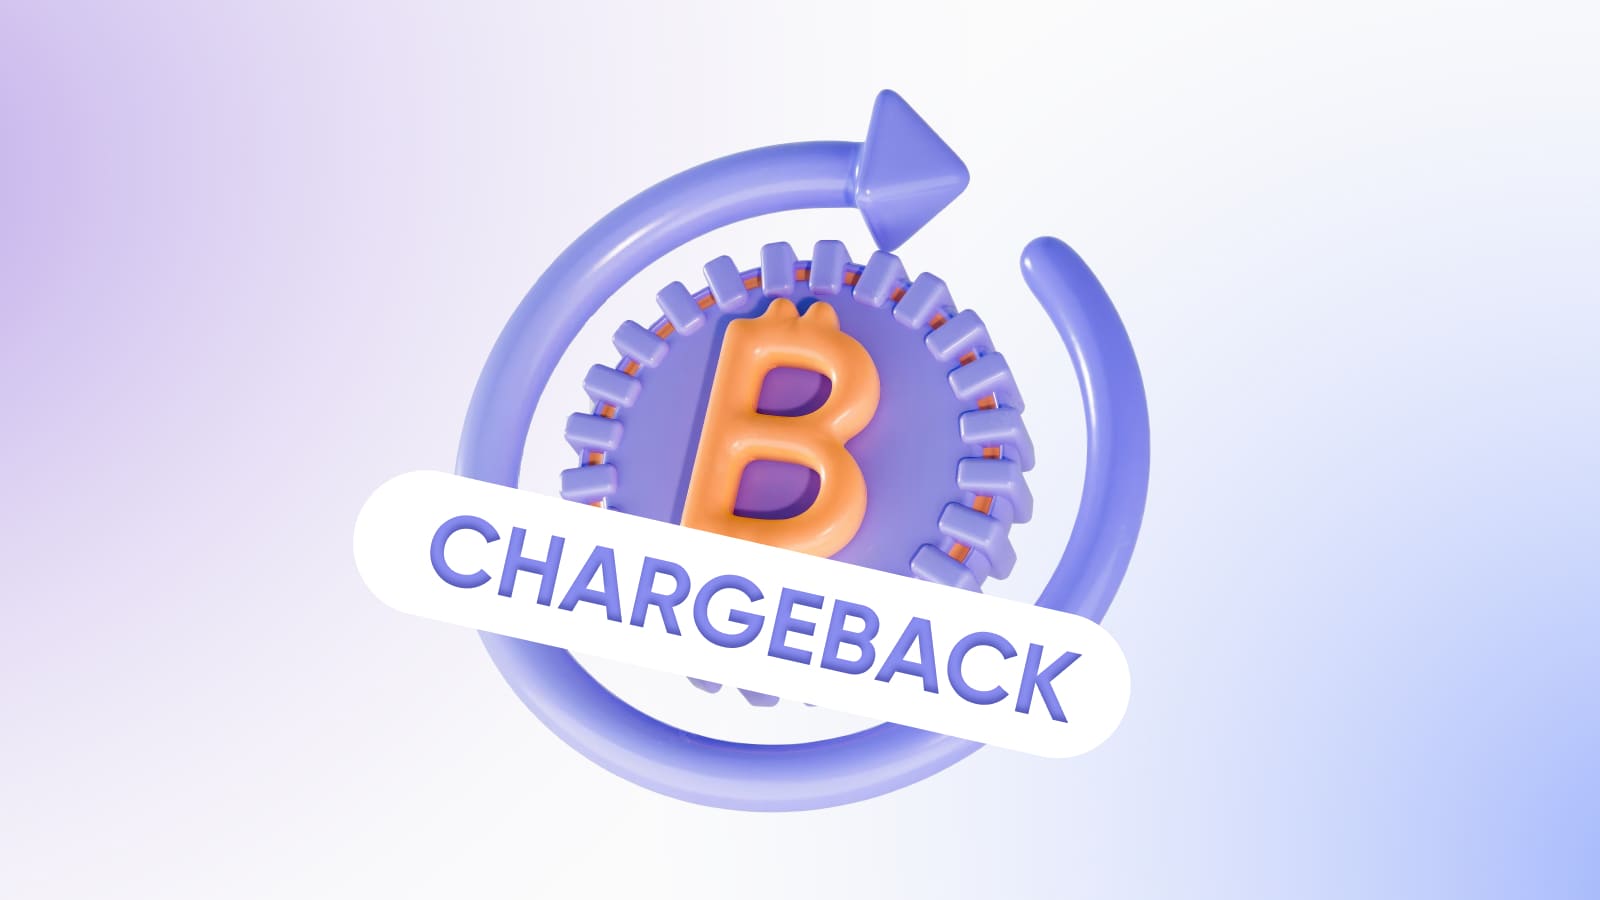 How will accepting crypto payments help businesses avoid going through the chargeback?